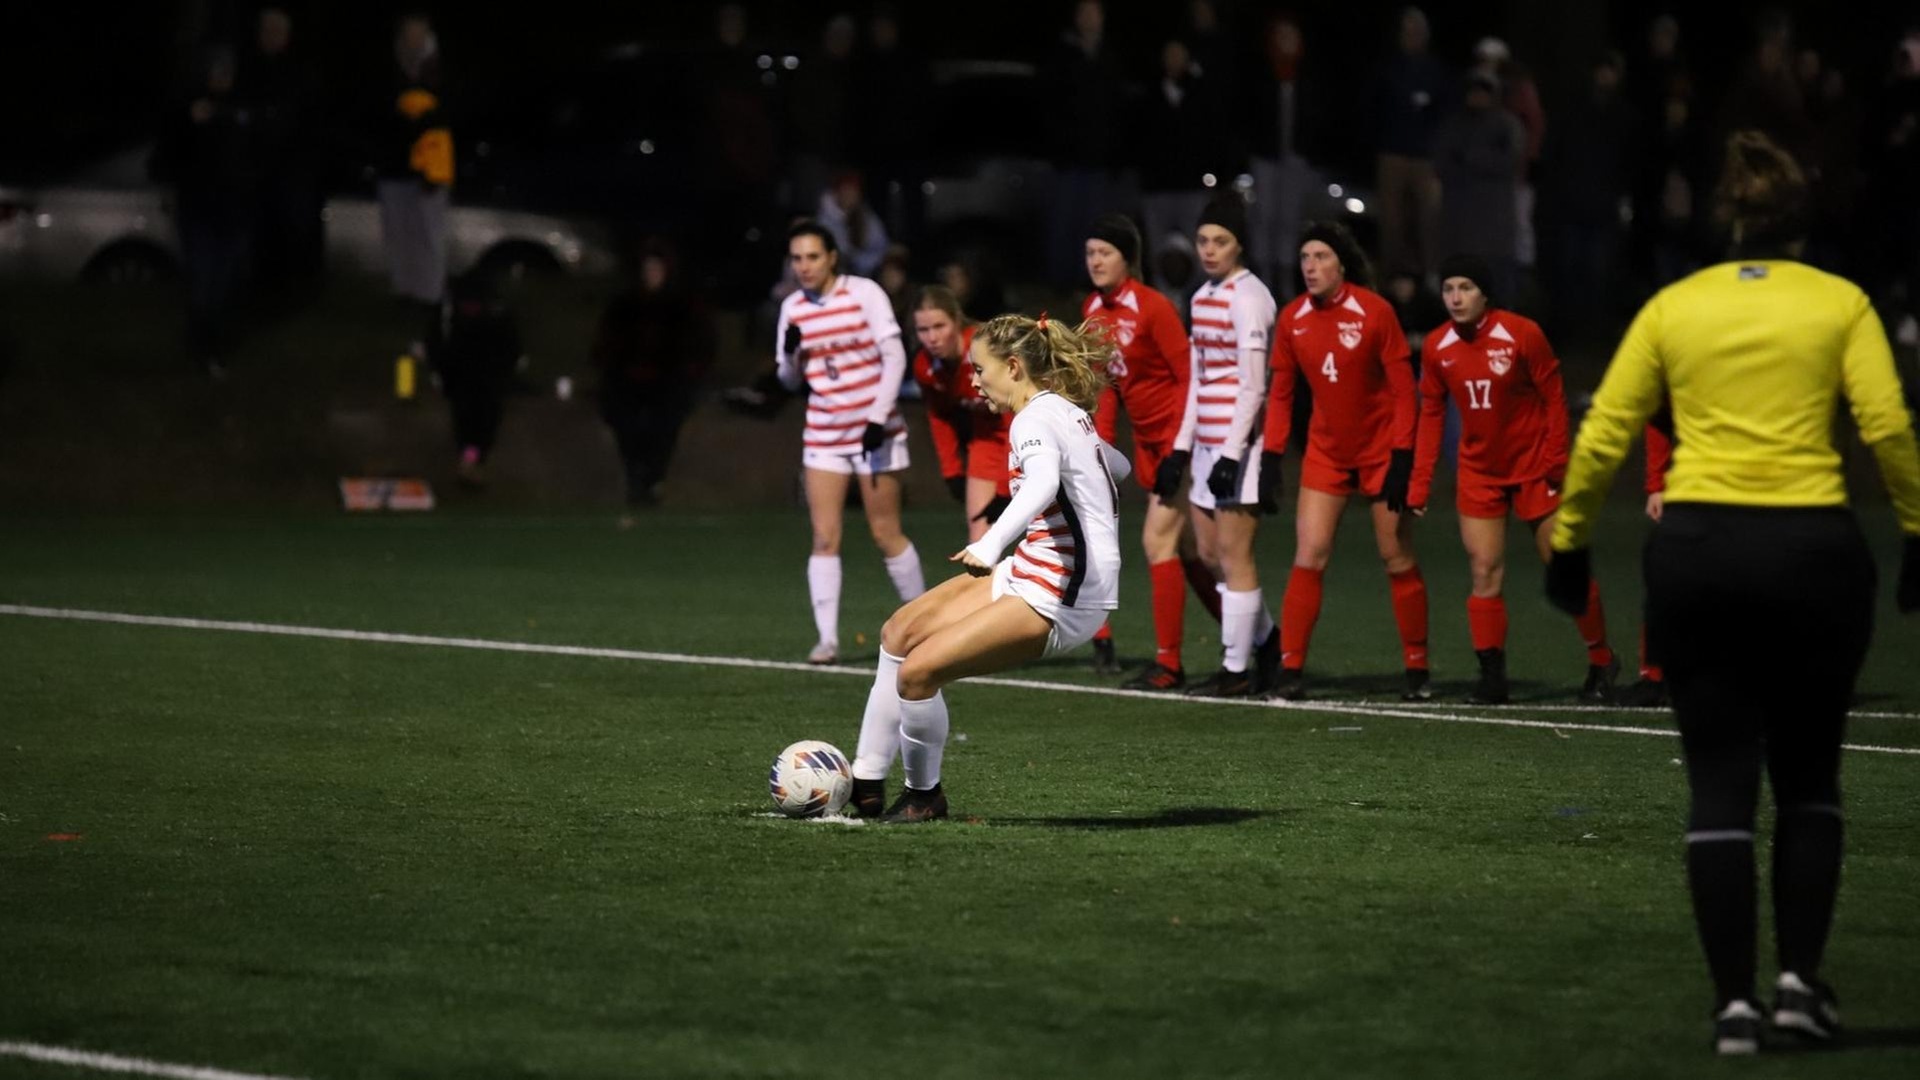 women's soccer player wearing white uniform striking a shot from the penalty mark with players standing behind her